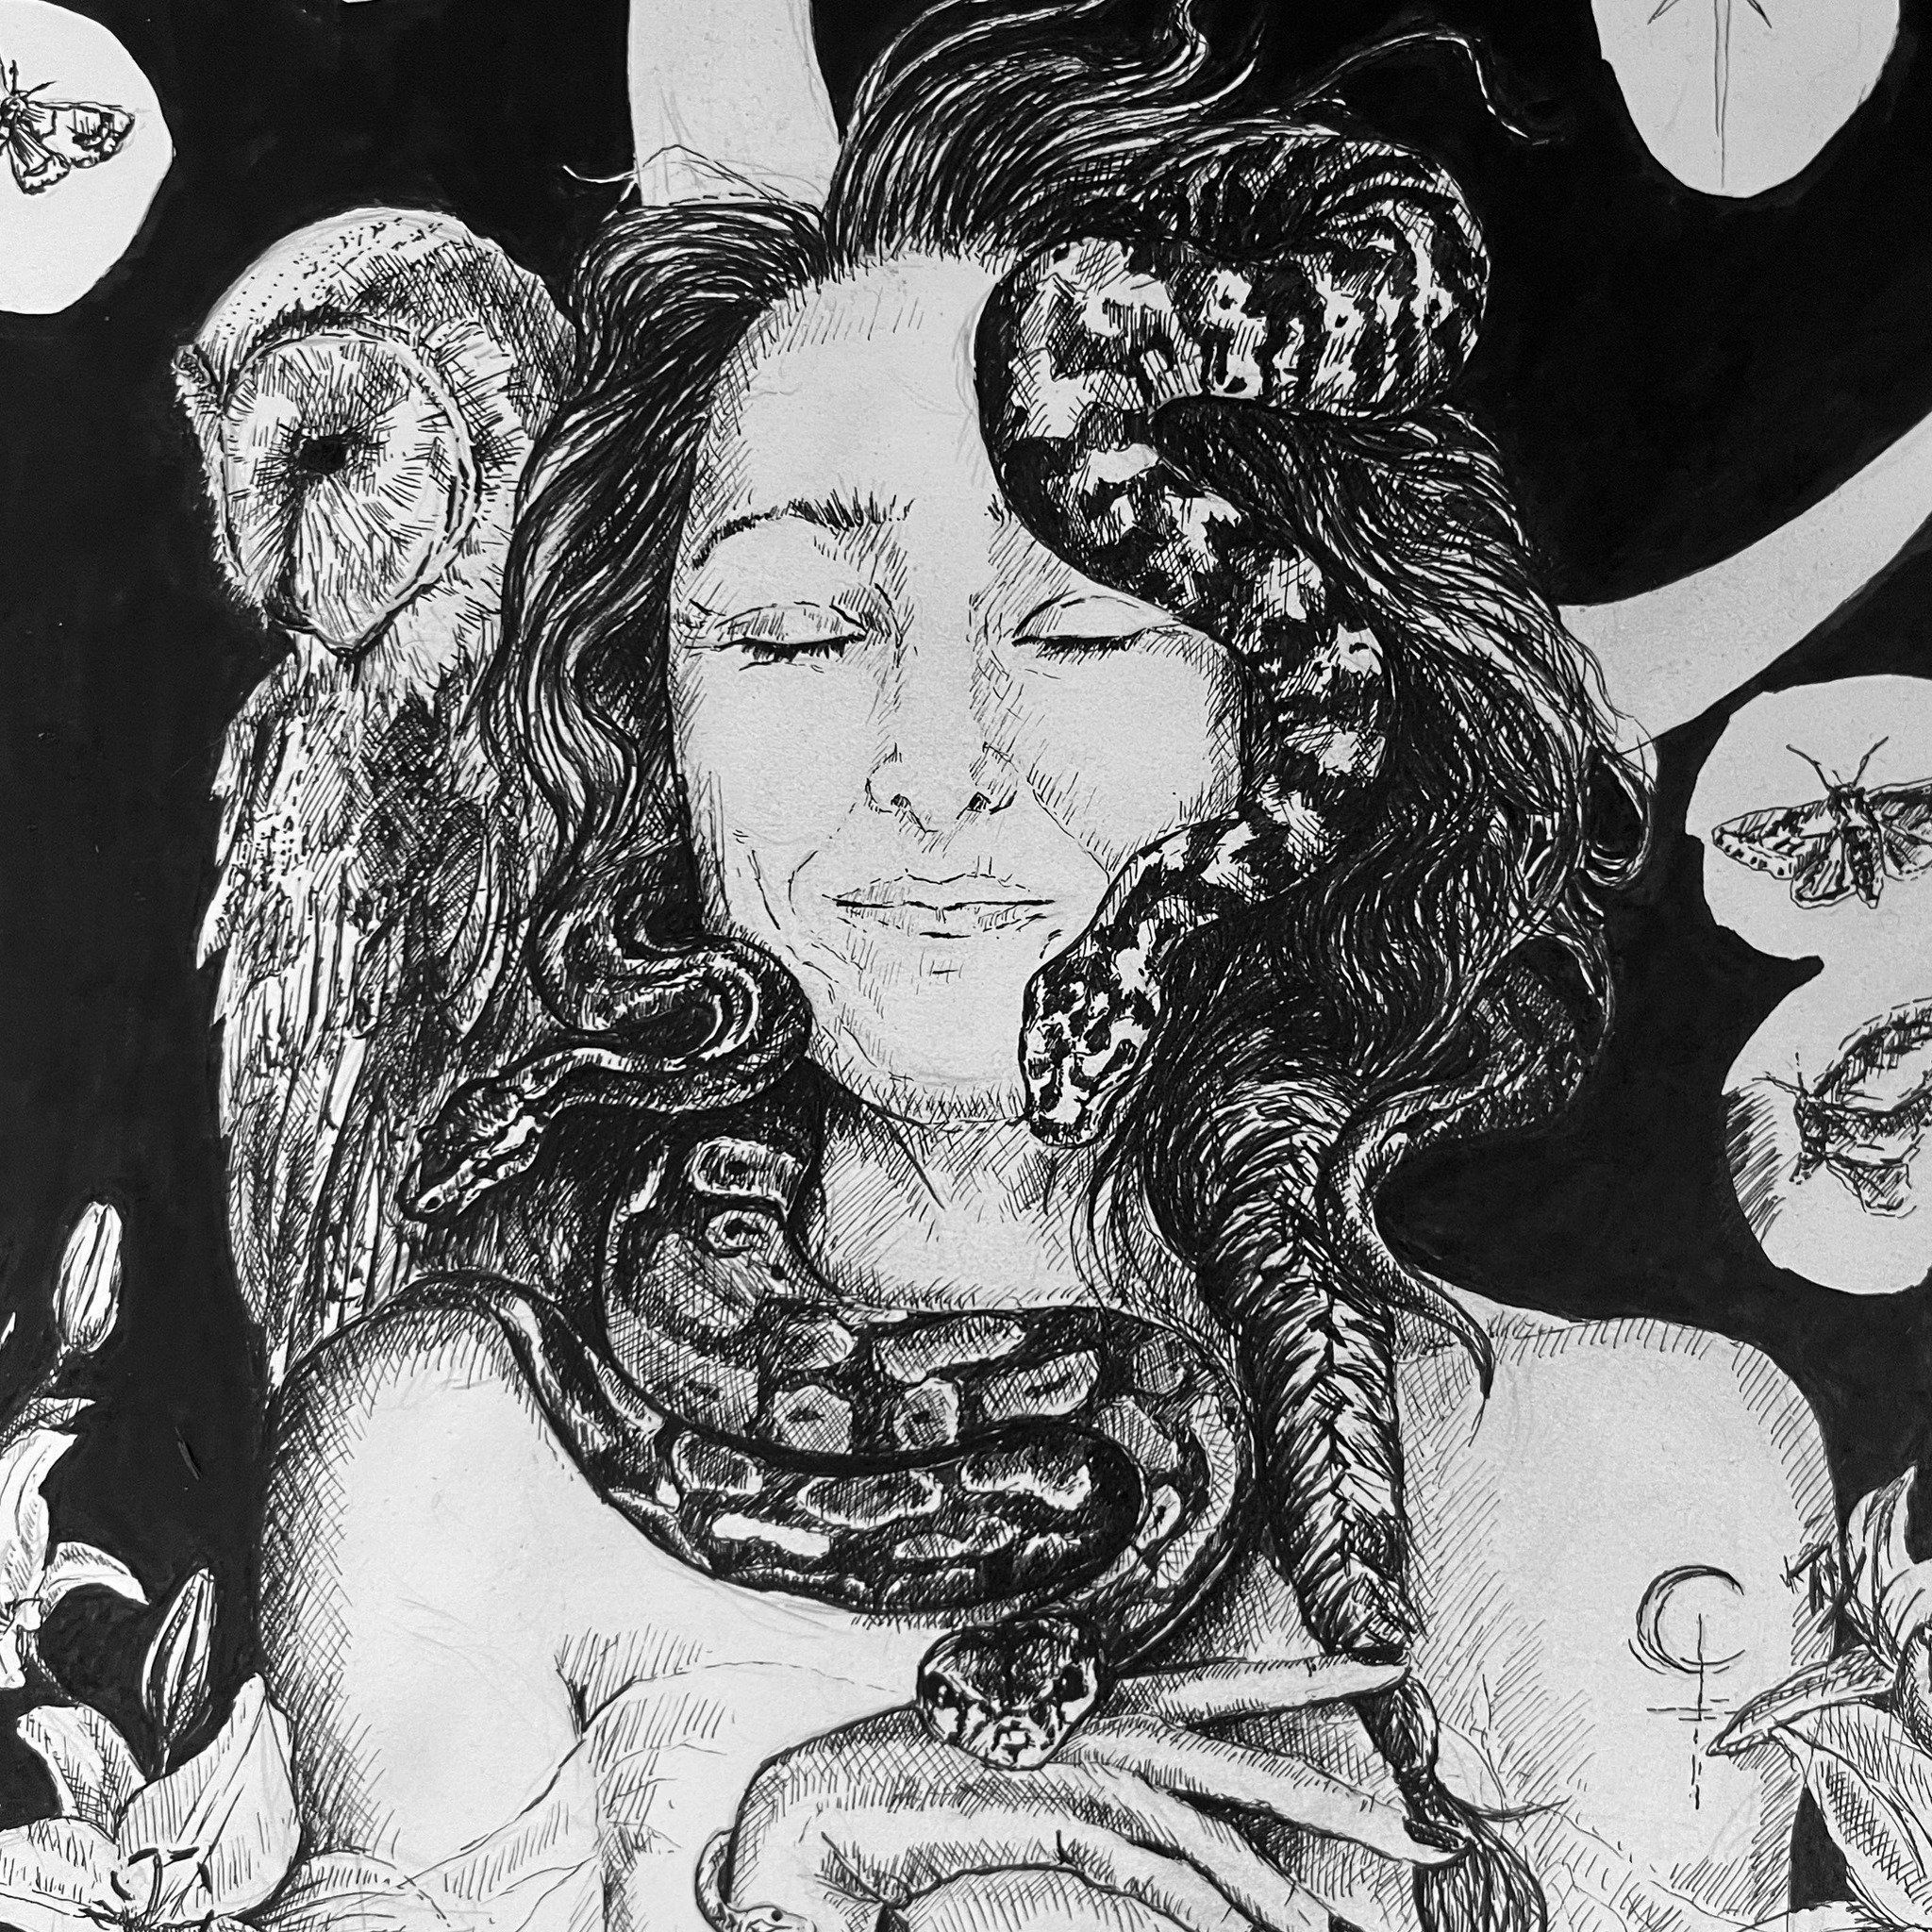 She&rsquo;s taking her time but Lilith is beginning to emerge.. 🐍🐍🐍🦉🌙✨✨

#lilith #snakes #lilithgoddess #goddessart #goddess #lilithart #witch #witchart #the_wolf_and_the_wild_things #art #drawing